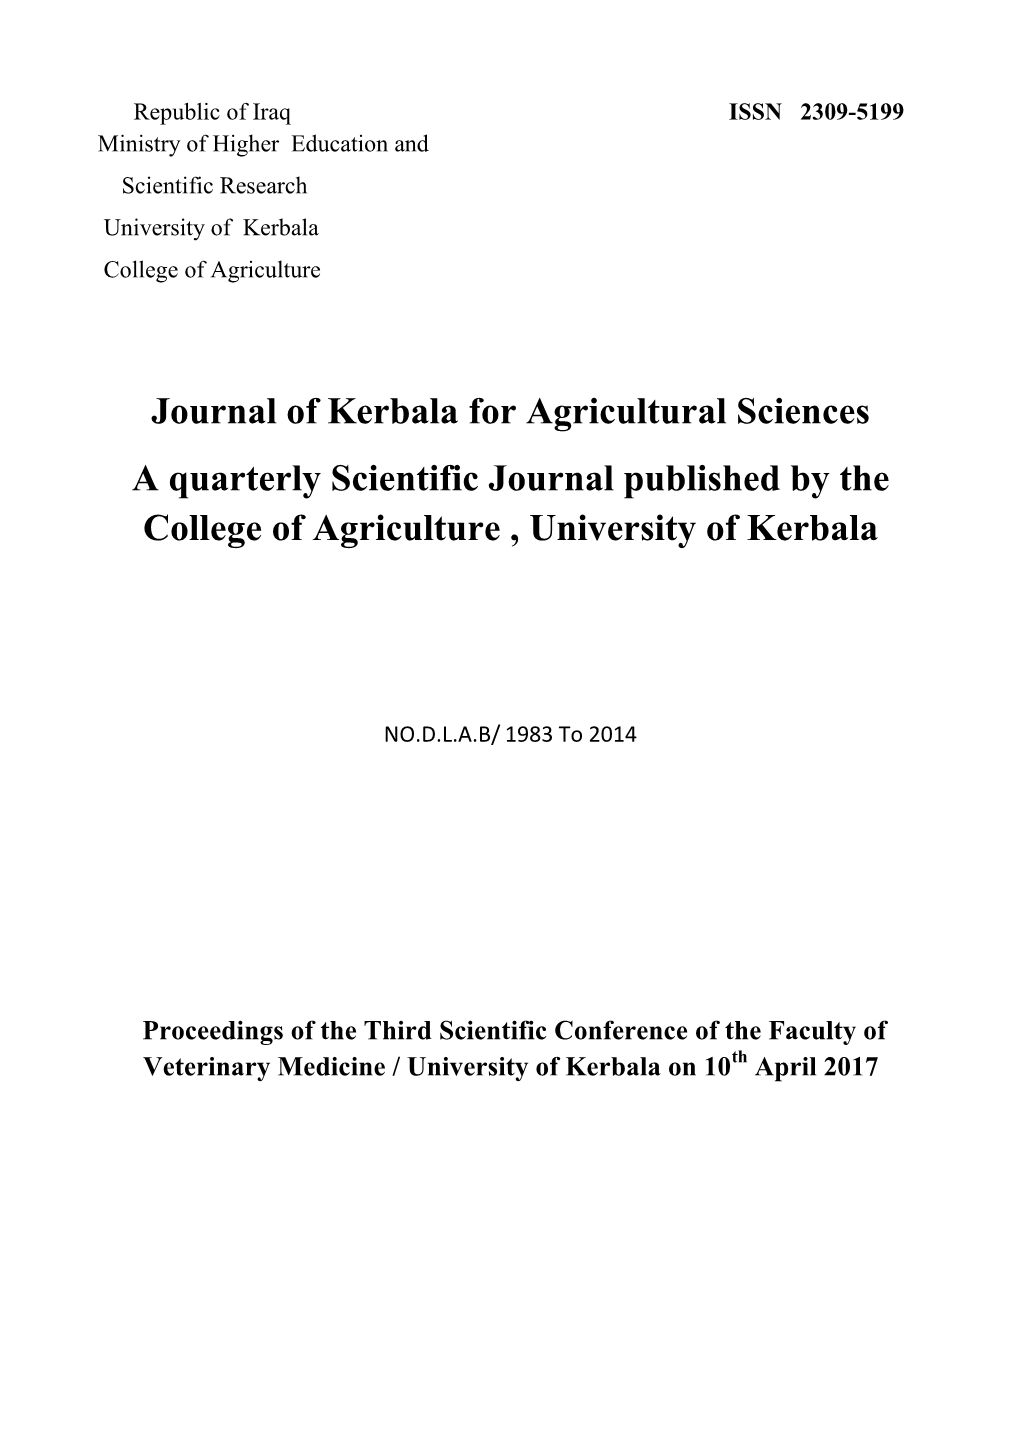 Journal of Kerbala for Agricultural Sciences a Quarterly Scientific Journal Published by The